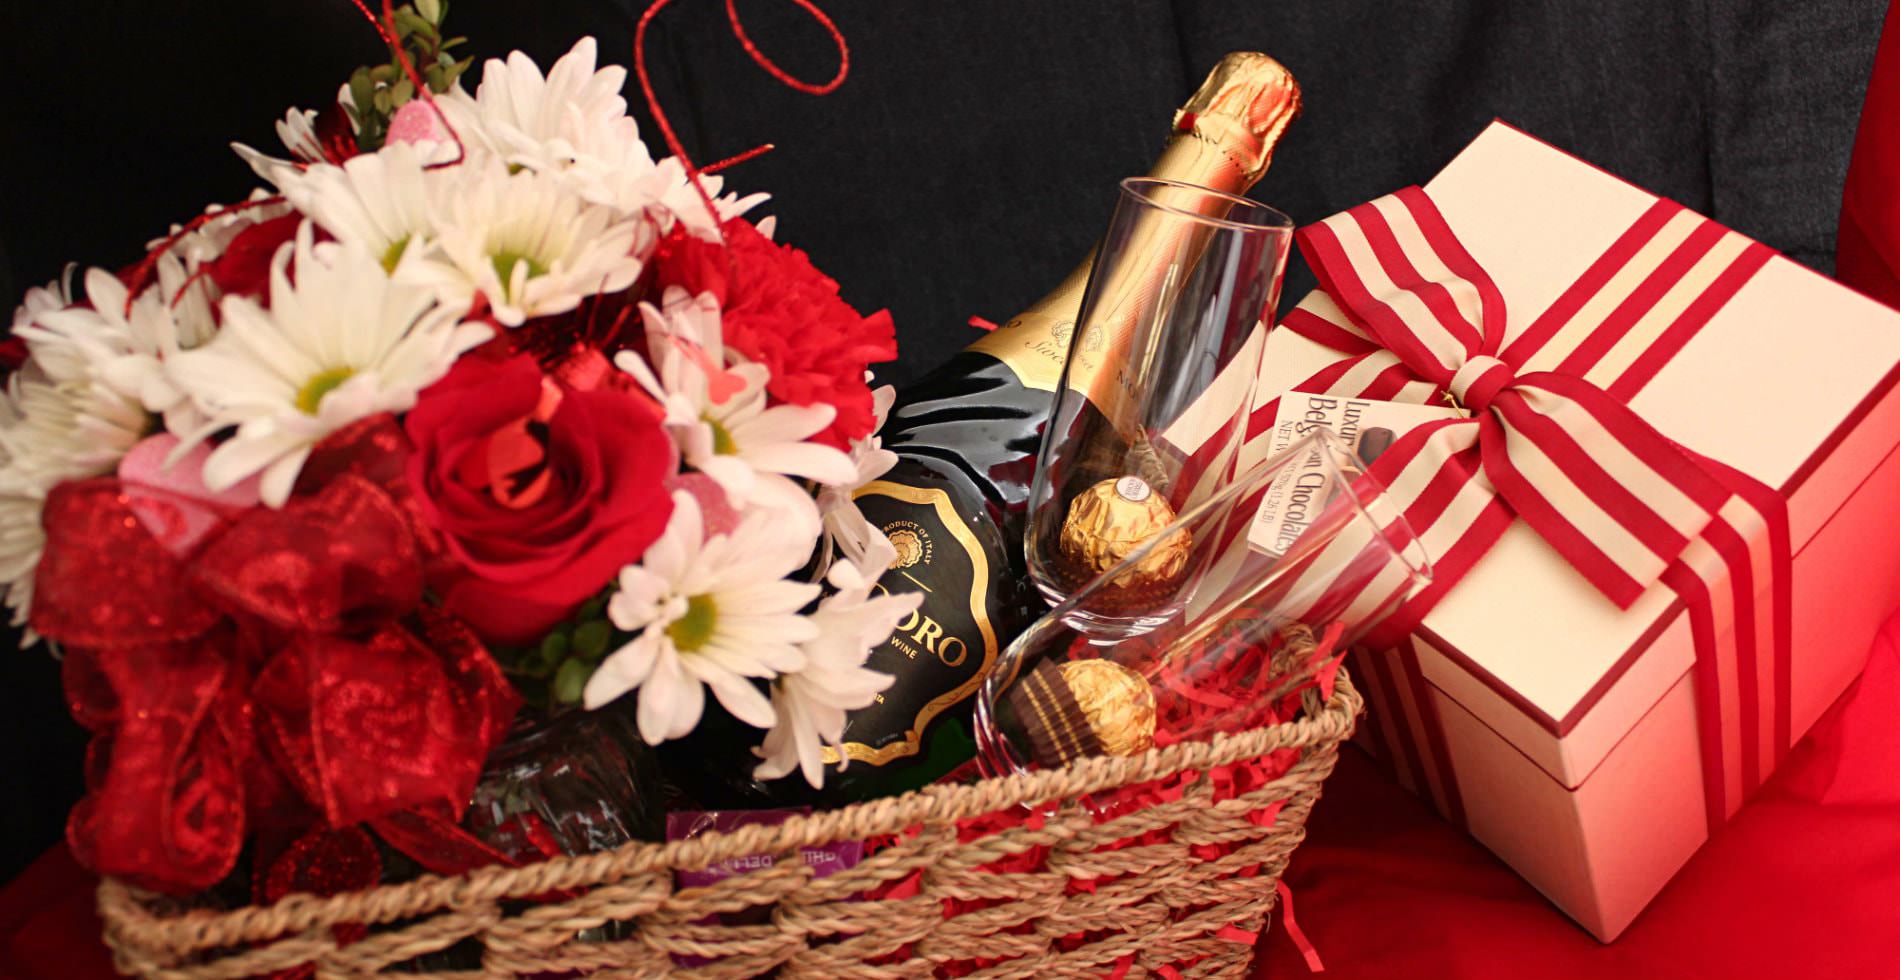 A tan wicker basket holding two wine glasses, a bottle of wine, a bouquet of flowers and a present